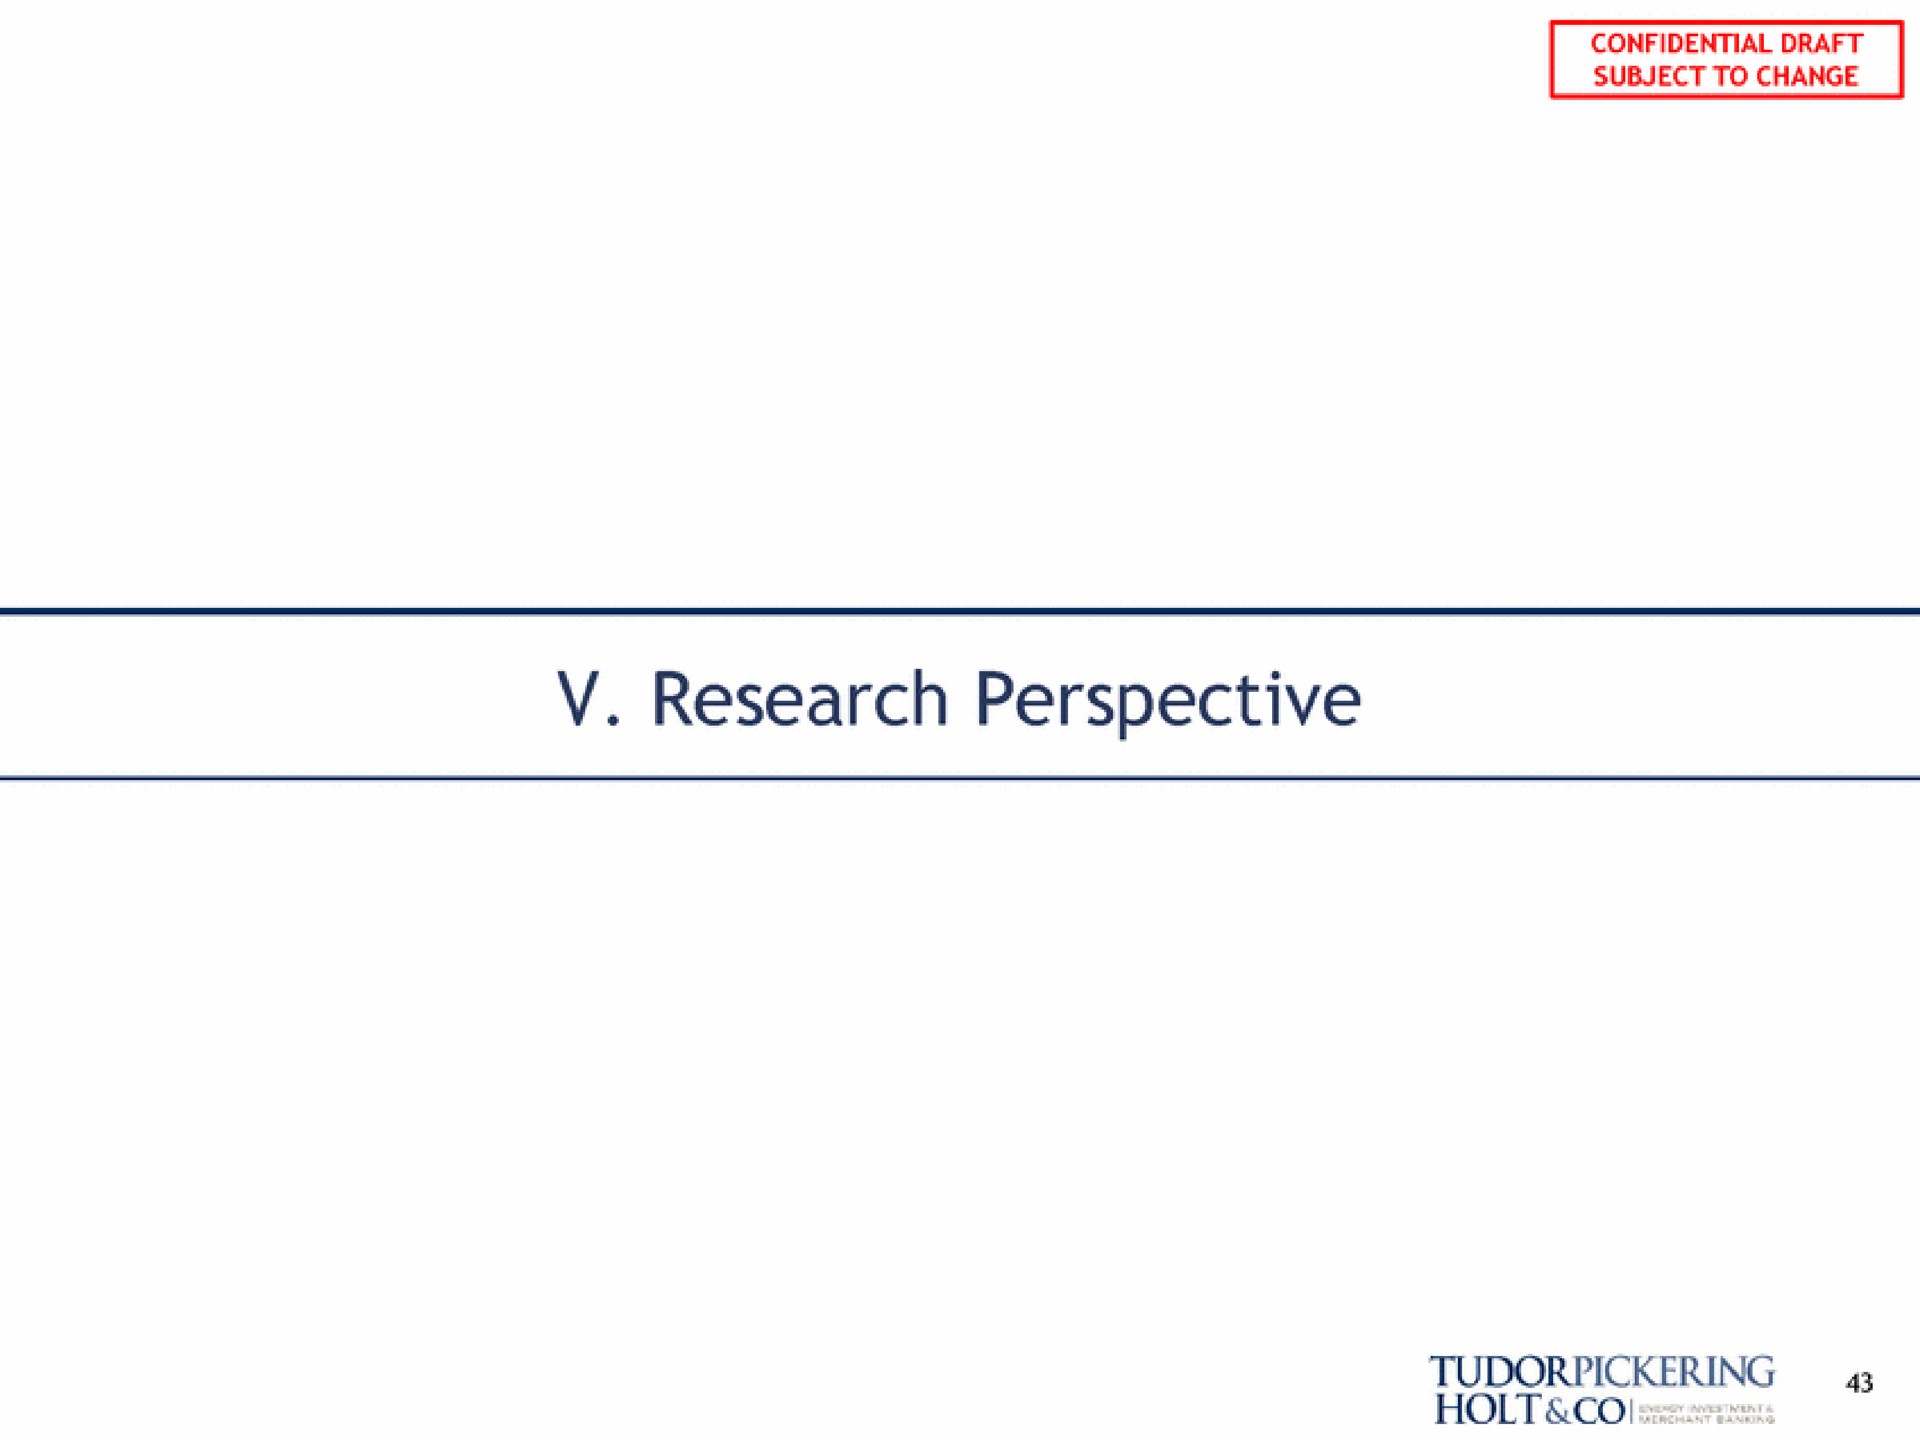 research perspective | Tudor, Pickering, Holt & Co